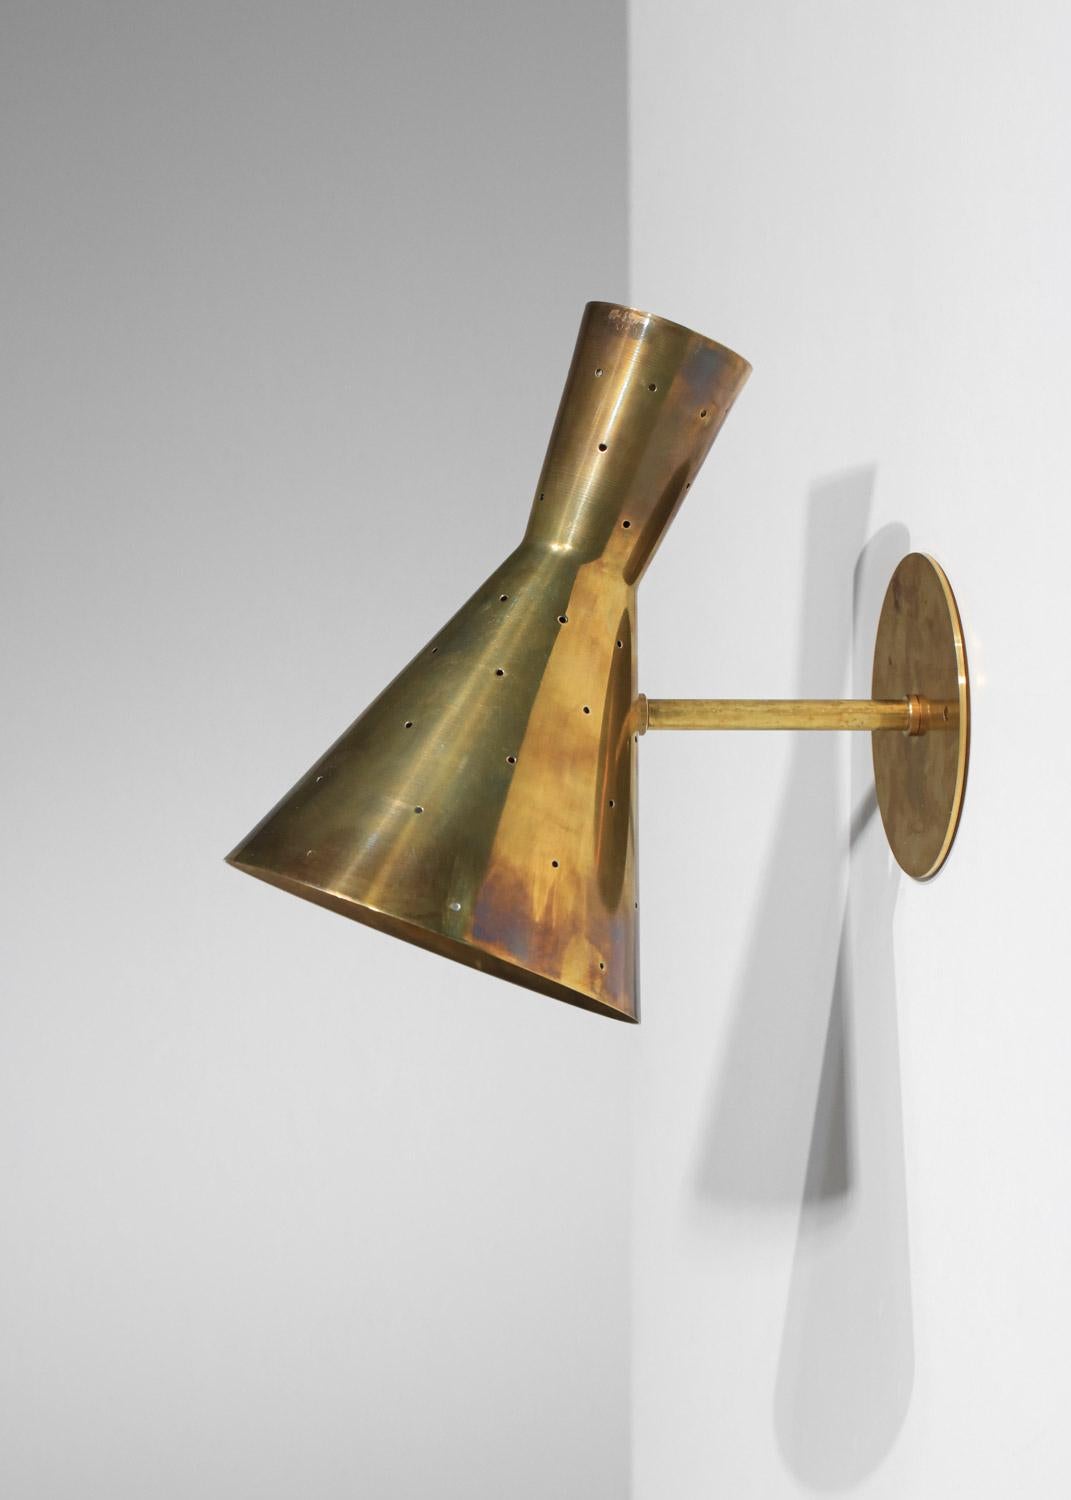 Danke Galerie is delighted to present its new collection of modern lighting fixtures. These sconces were designed in our studio to create a new range of modern, timeless lighting fixtures, with particular attention to detail in the finish and patina